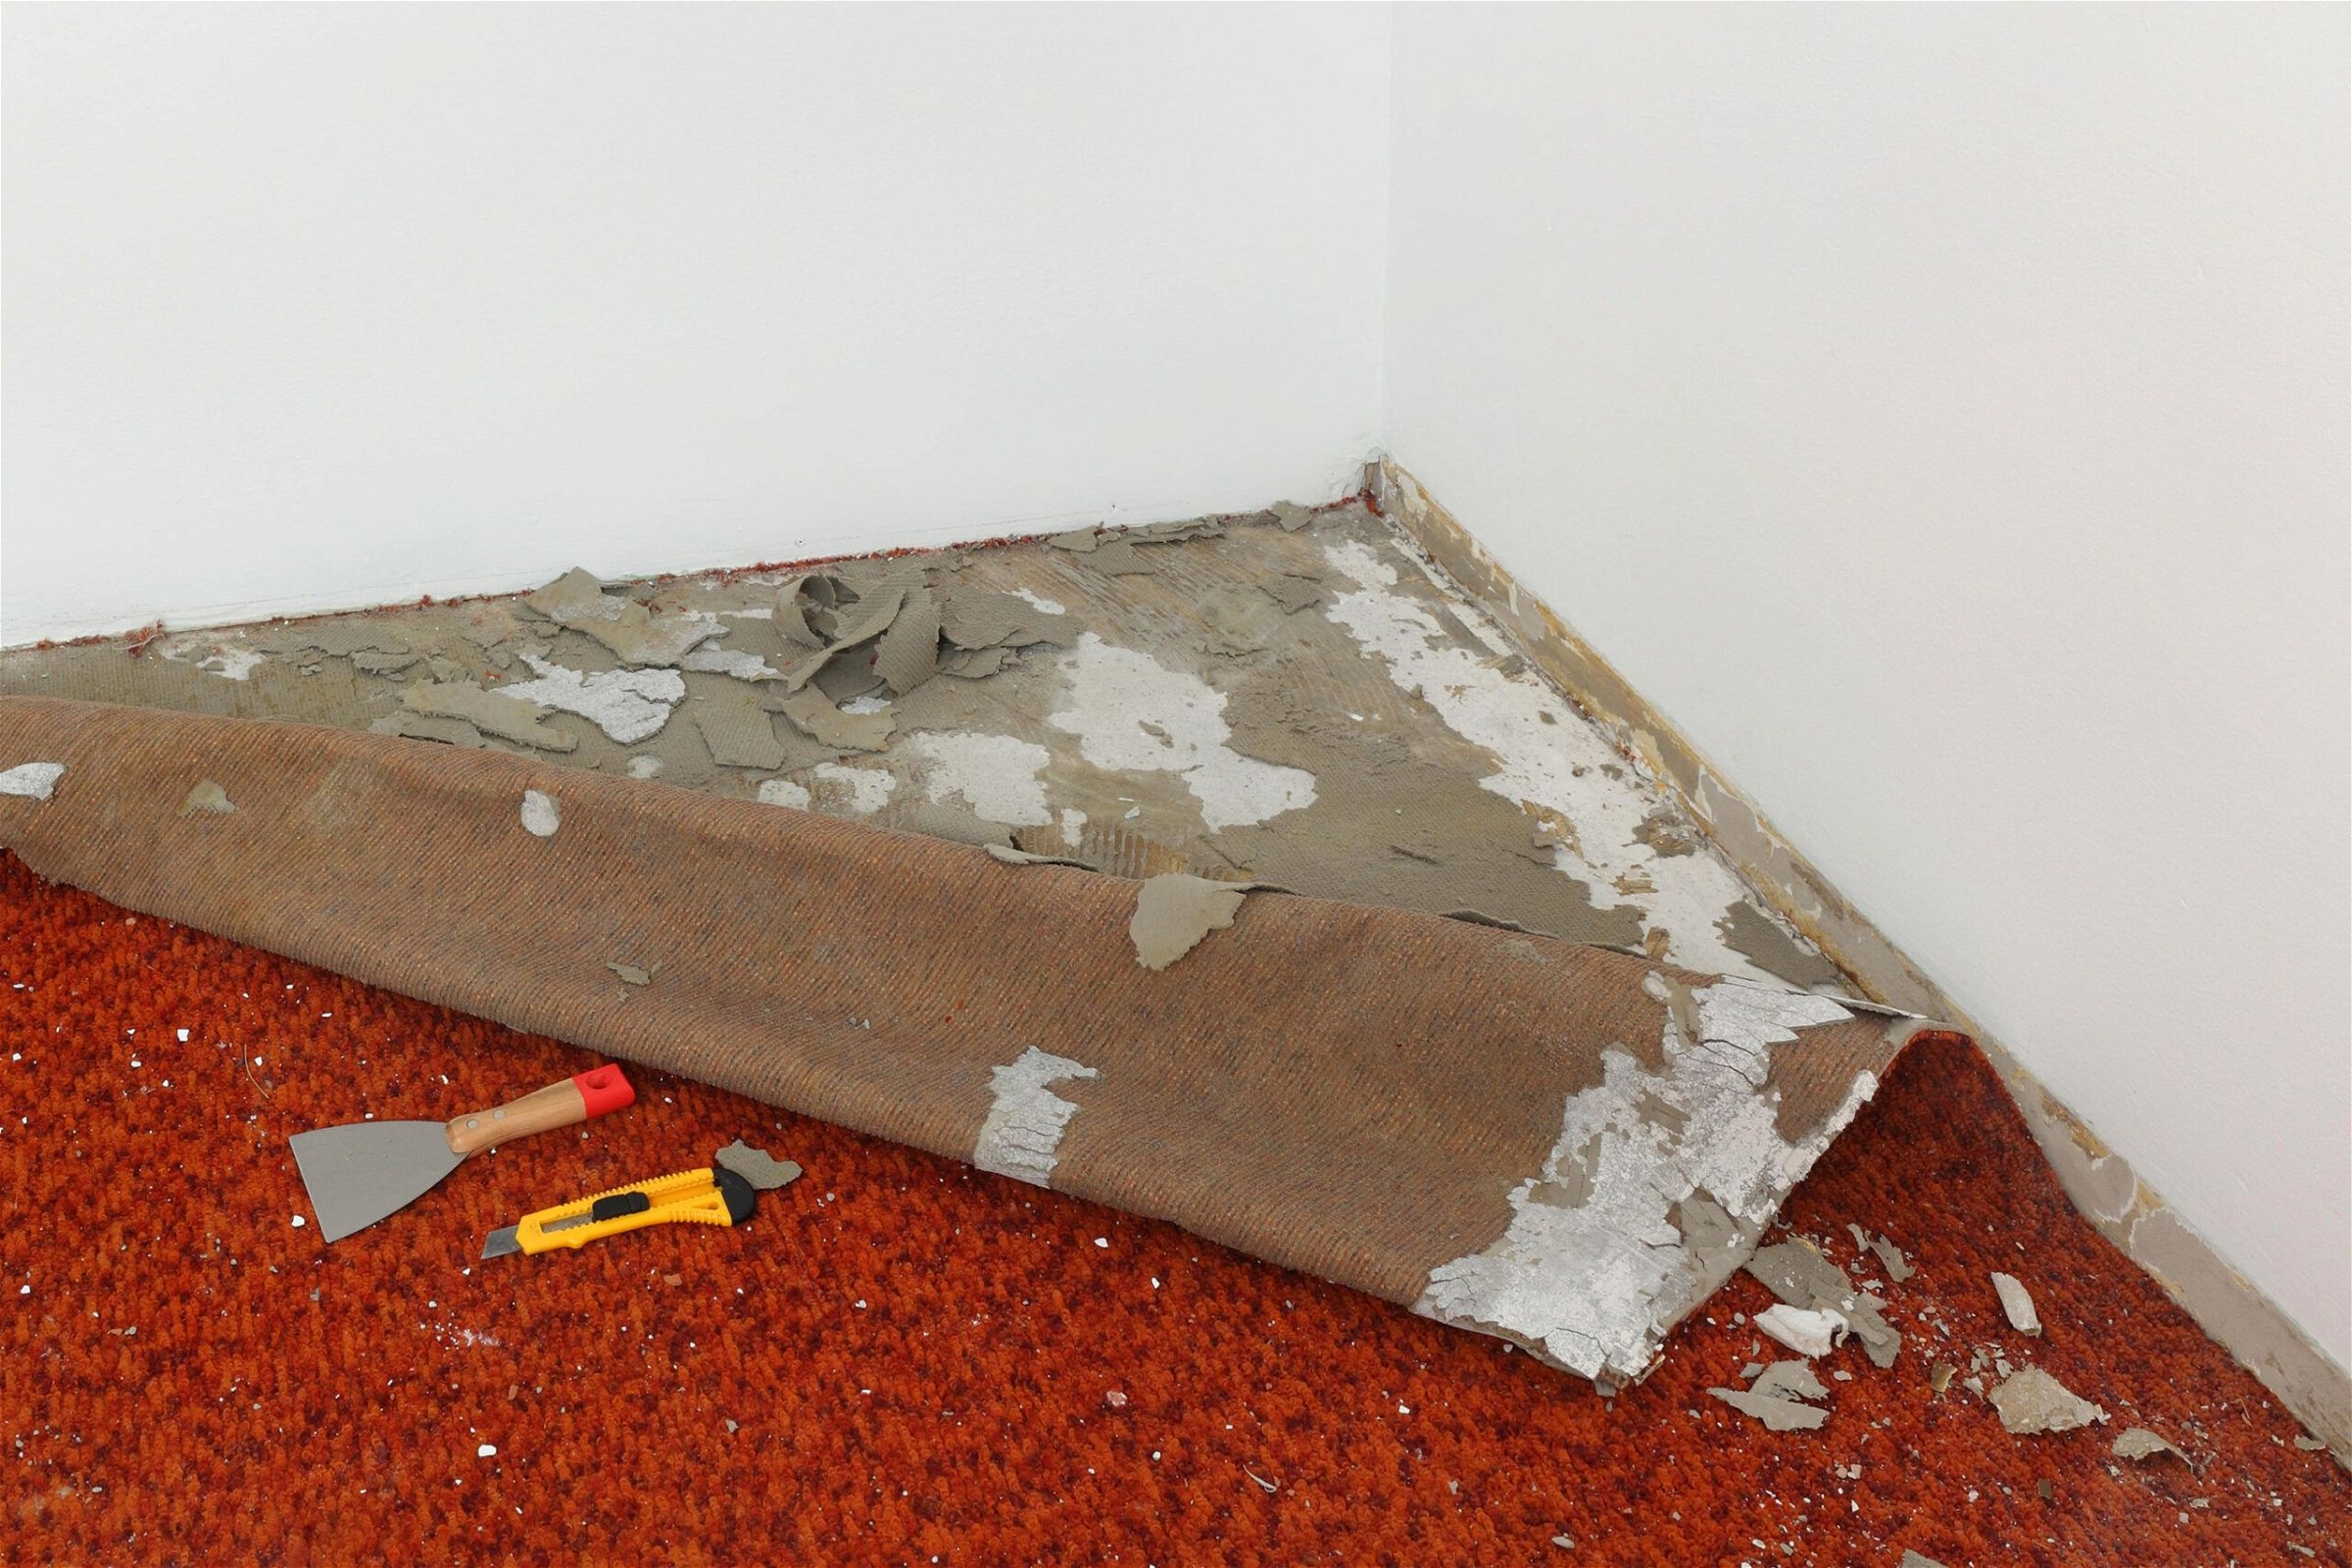 Carpet is being removed under the carpet removal service by junk professionals